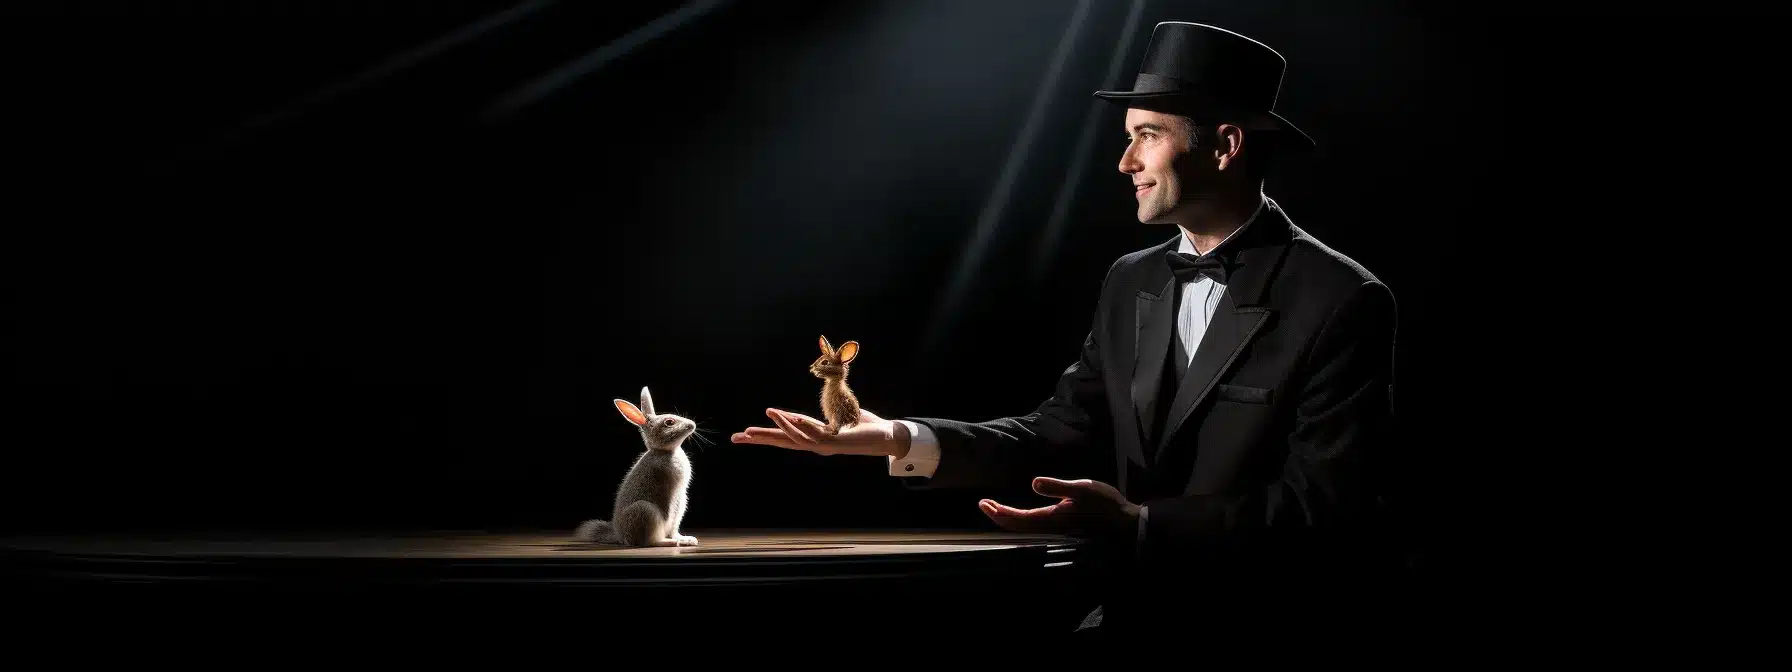 A Magician Pulling A Rabbit Out Of A Hat, Captivating And Dazzling The Audience.